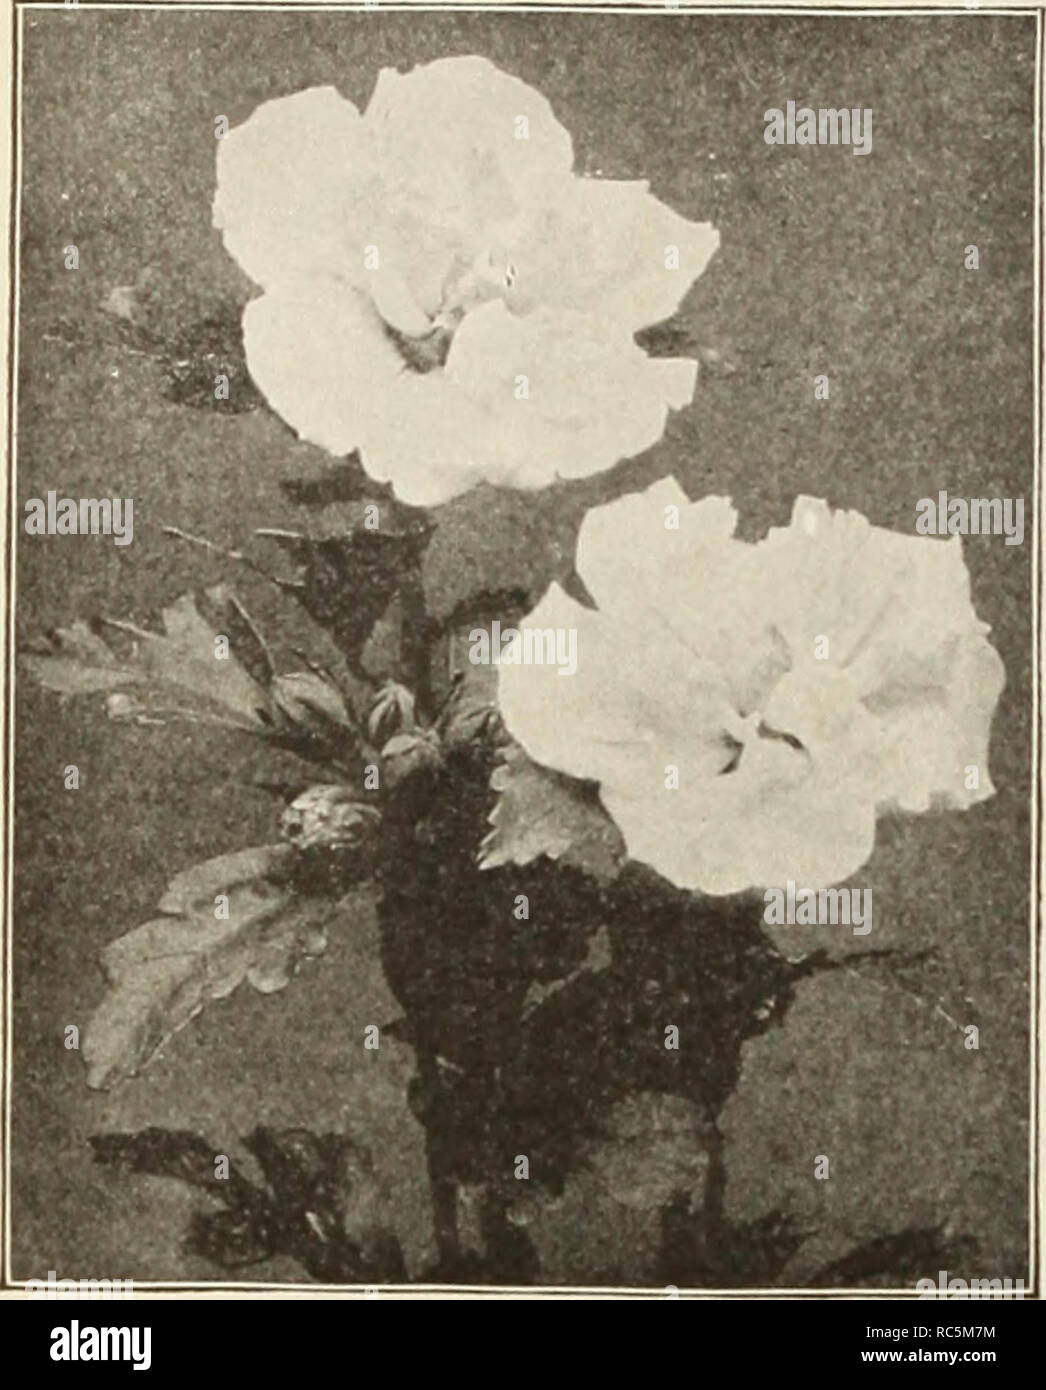 . Dreer's mid-summer catalogue 1913. Flowers Seeds Catalogs; Fruit Seeds Catalogs; Vegetables Seeds Catalogs; Nurseries (Horticulture) Catalogs; Gardening Equipment and supplies Catalogs. Pot-Grown Choice Hardy Shrubs FOR SUMMER PLANTING. ALTHEA (Rose of Sharon) Abelia. Chlnensls Qrandlflora. A choice small Shrub of (jraceful habit, producinsr throuKh the entire summer and fall months white tinted lilac heather-like flowers in such abundance as to com- pletely cover the plant. 30 cts. each; $3.00 per doz. WilV wait until late in the fall or possibly until next spring to plant shrubbery when yo Stock Photo